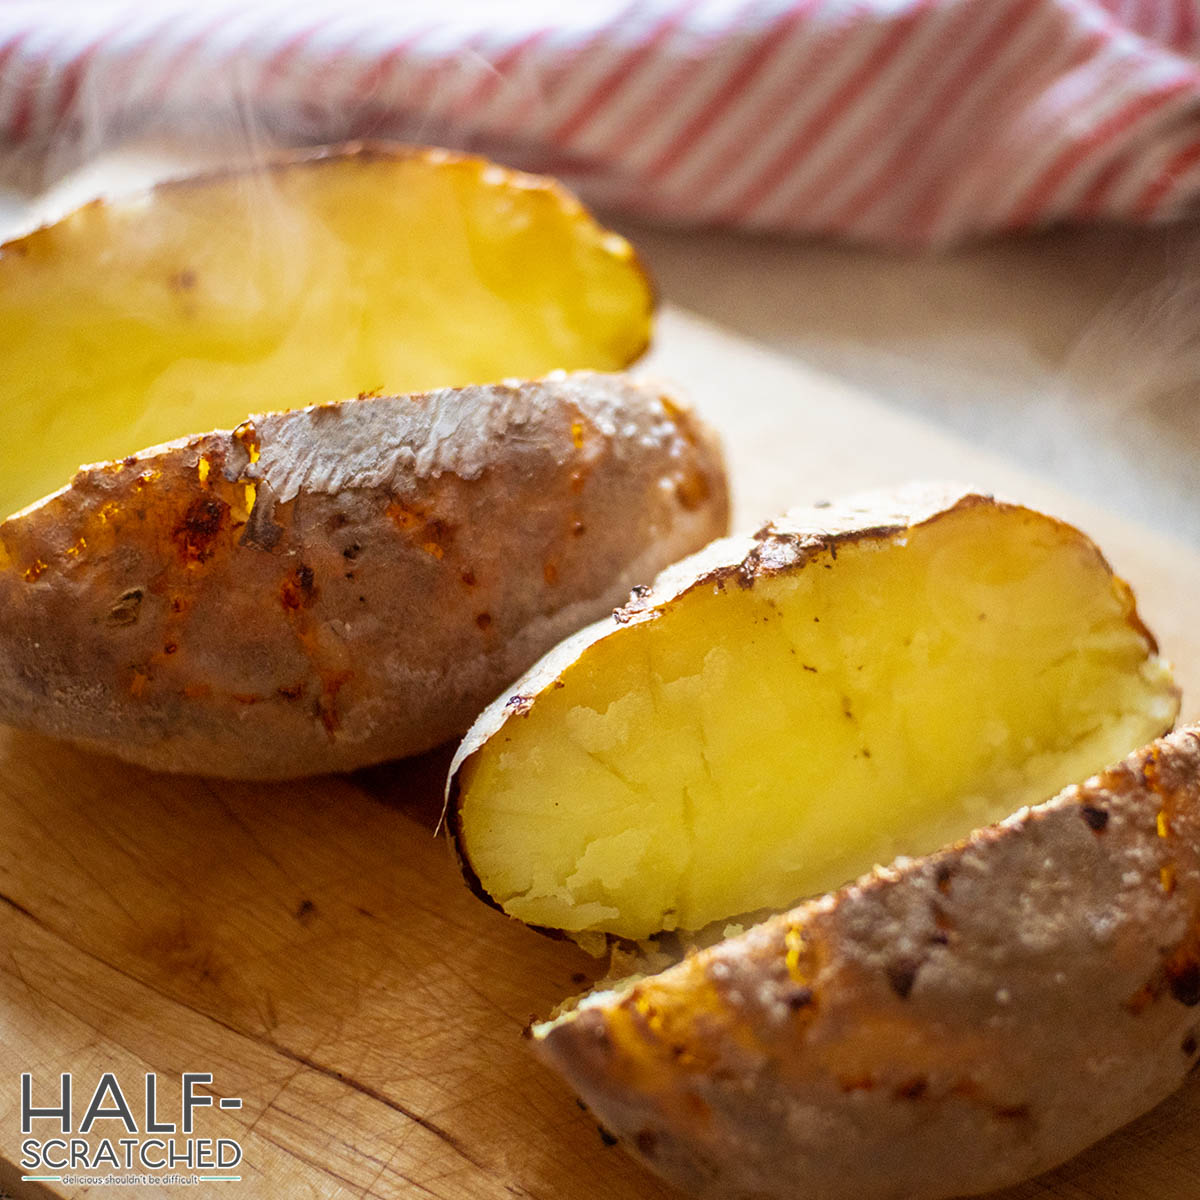 Halved baked potatoes